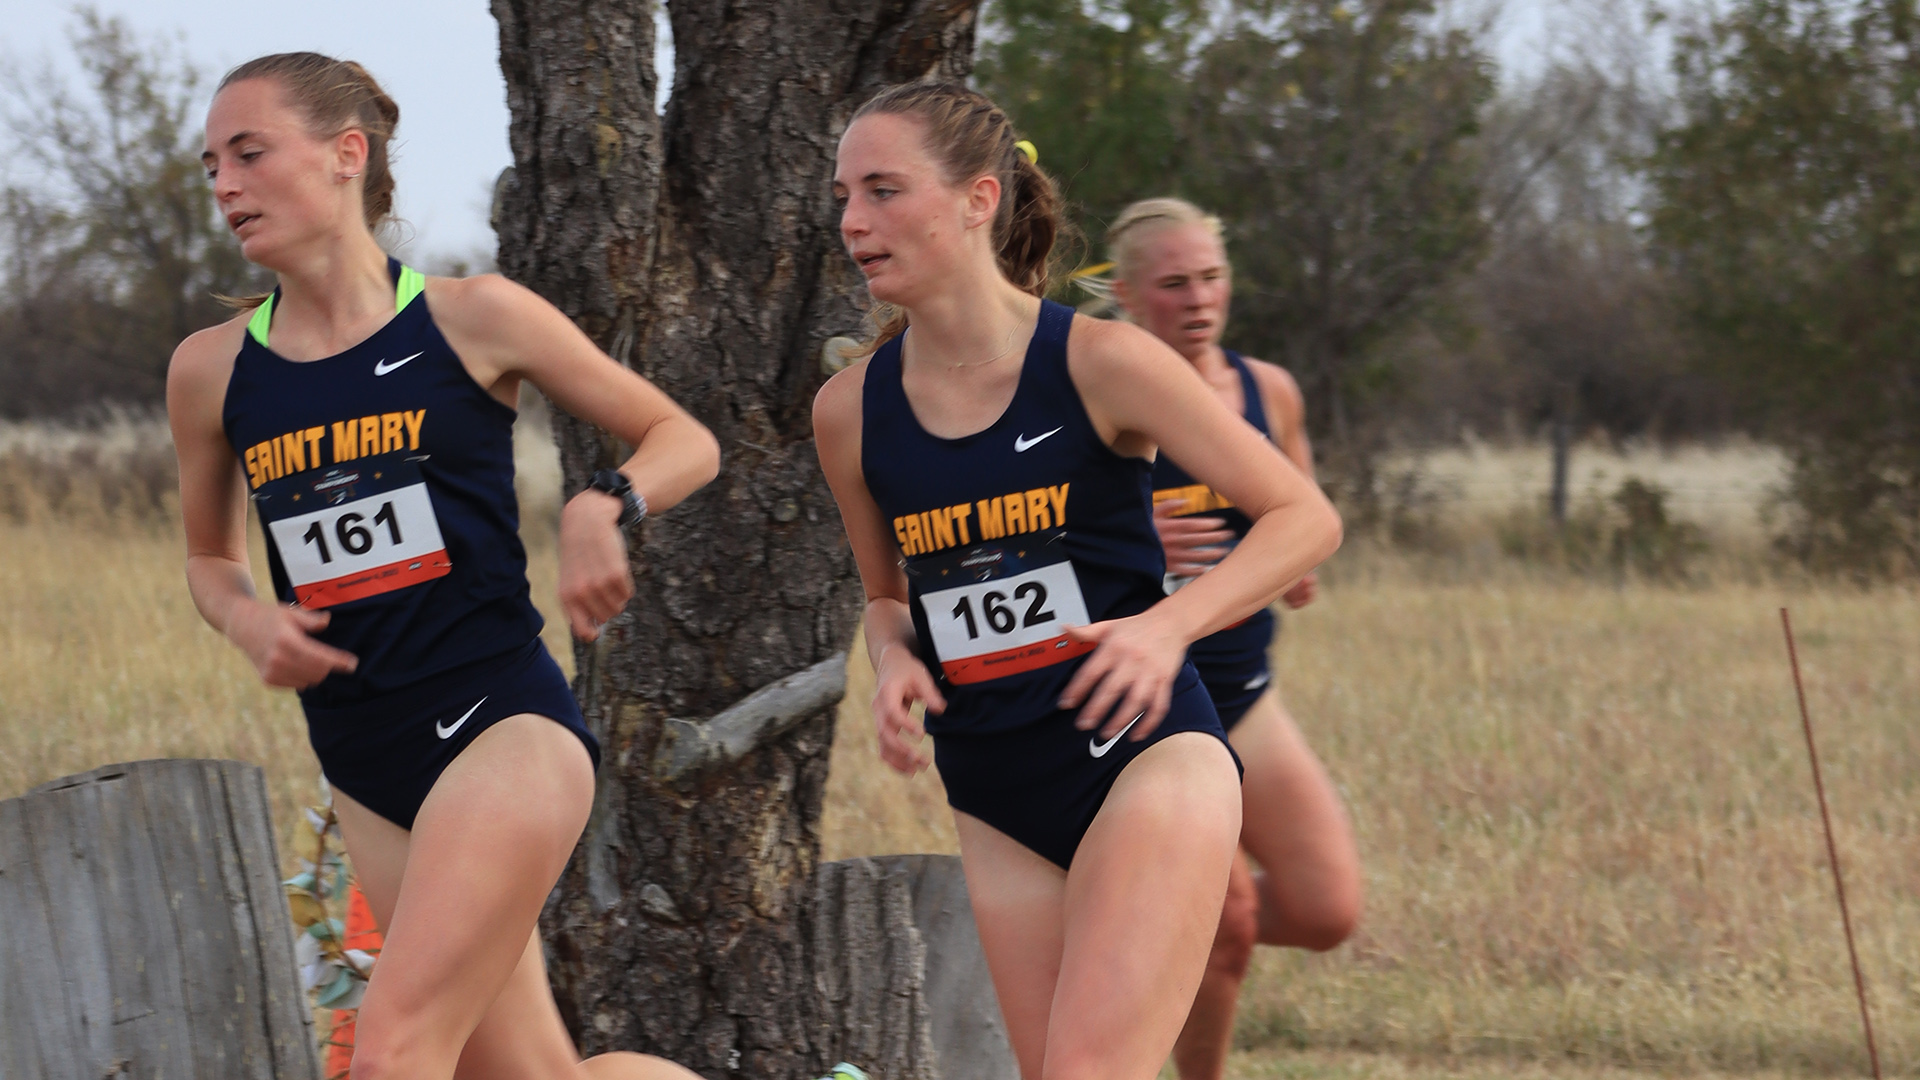 Spires Take Third Place at NAIA Cross Country National Championships